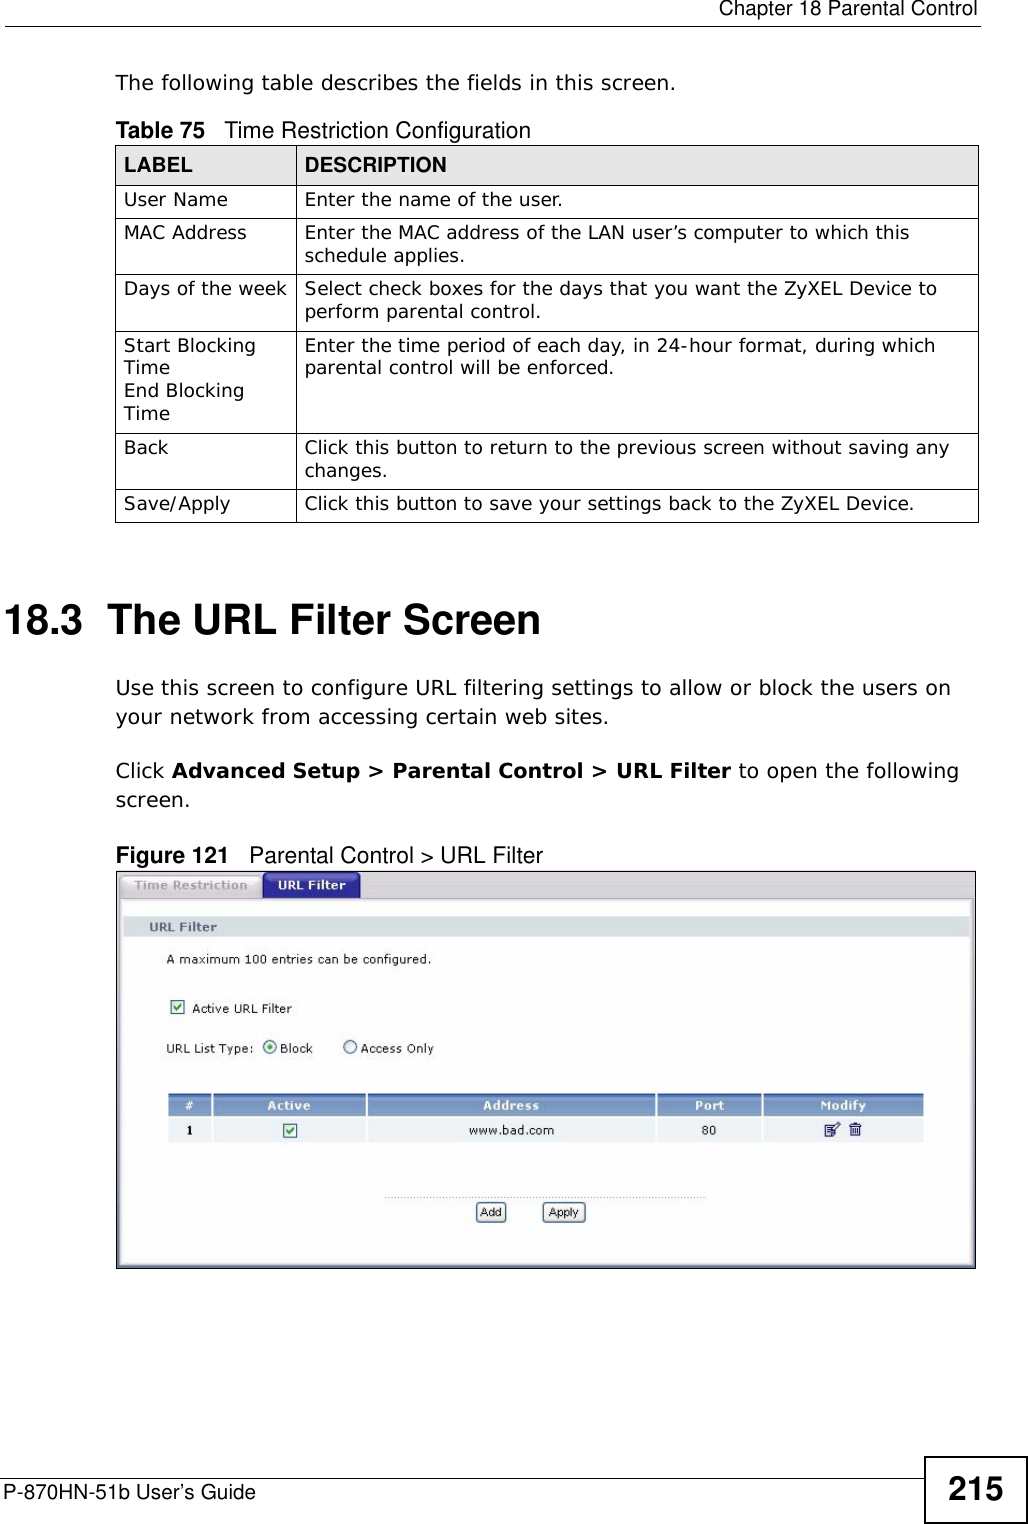  Chapter 18 Parental ControlP-870HN-51b User’s Guide 215The following table describes the fields in this screen. 18.3  The URL Filter ScreenUse this screen to configure URL filtering settings to allow or block the users on your network from accessing certain web sites.Click Advanced Setup &gt; Parental Control &gt; URL Filter to open the following screen. Figure 121   Parental Control &gt; URL Filter Table 75   Time Restriction ConfigurationLABEL DESCRIPTIONUser Name Enter the name of the user.MAC Address Enter the MAC address of the LAN user’s computer to which this schedule applies.Days of the week Select check boxes for the days that you want the ZyXEL Device to perform parental control. Start Blocking TimeEnd Blocking TimeEnter the time period of each day, in 24-hour format, during which parental control will be enforced. Back Click this button to return to the previous screen without saving any changes.Save/Apply Click this button to save your settings back to the ZyXEL Device.